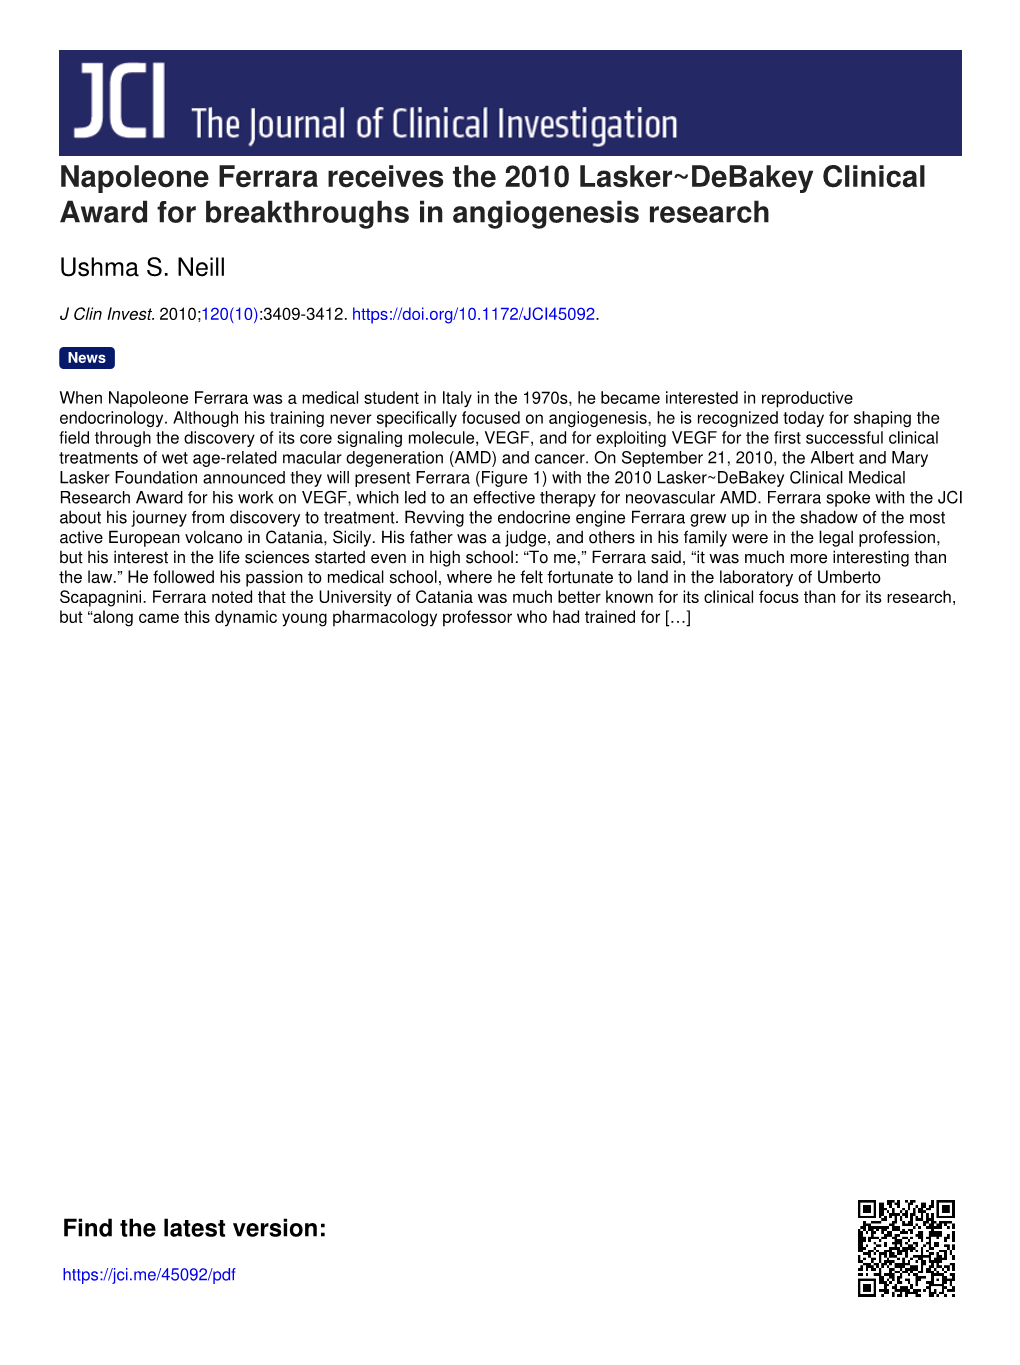 Napoleone Ferrara Receives the 2010 Lasker~Debakey Clinical Award for Breakthroughs in Angiogenesis Research